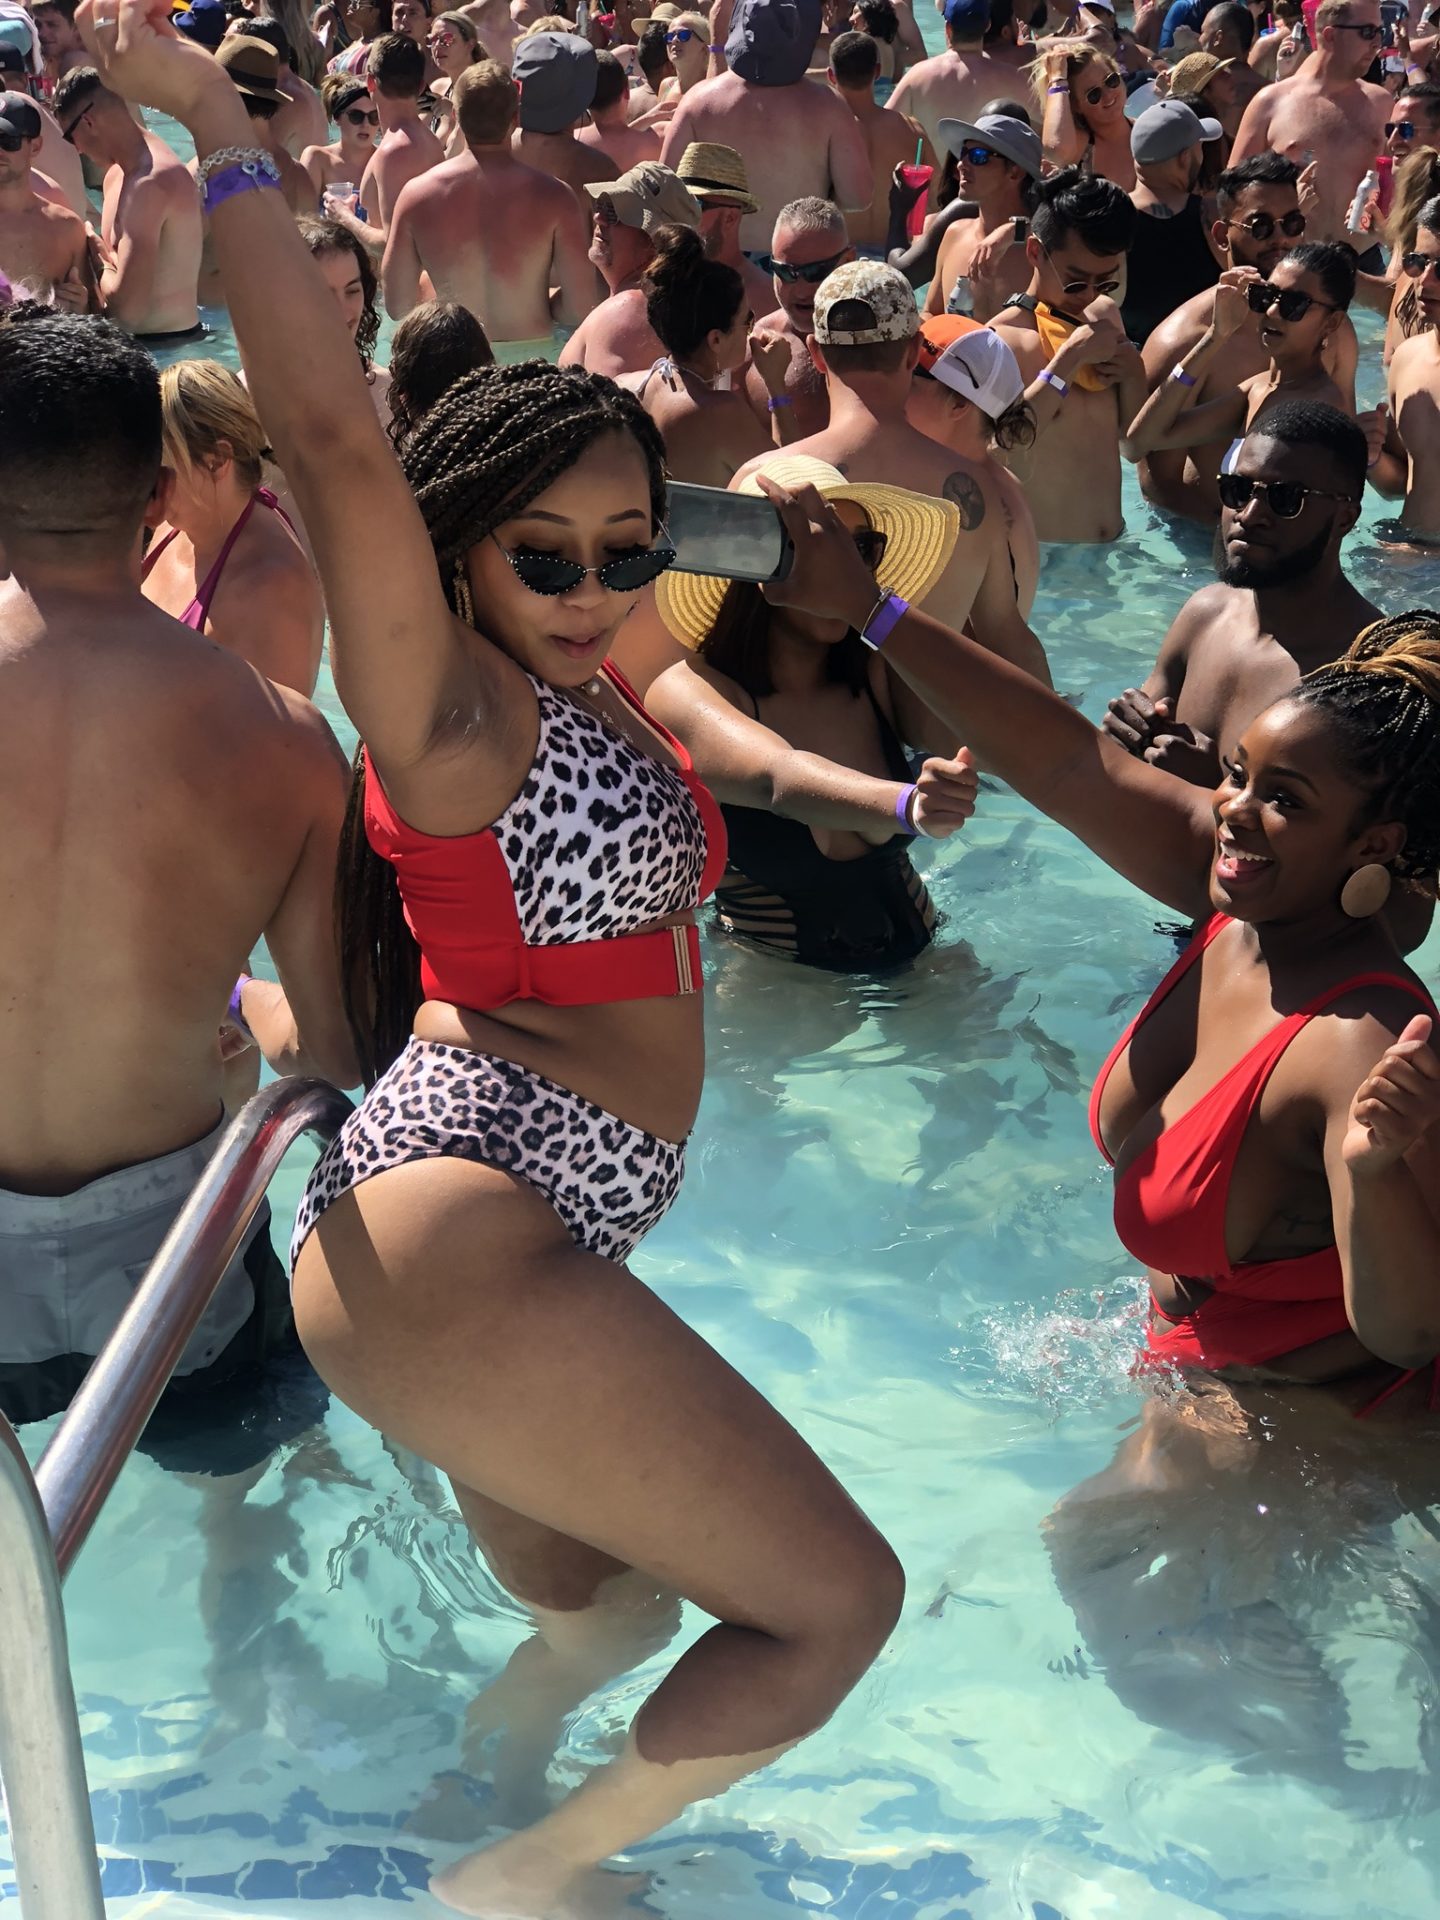 Pool Party at the Flamingo